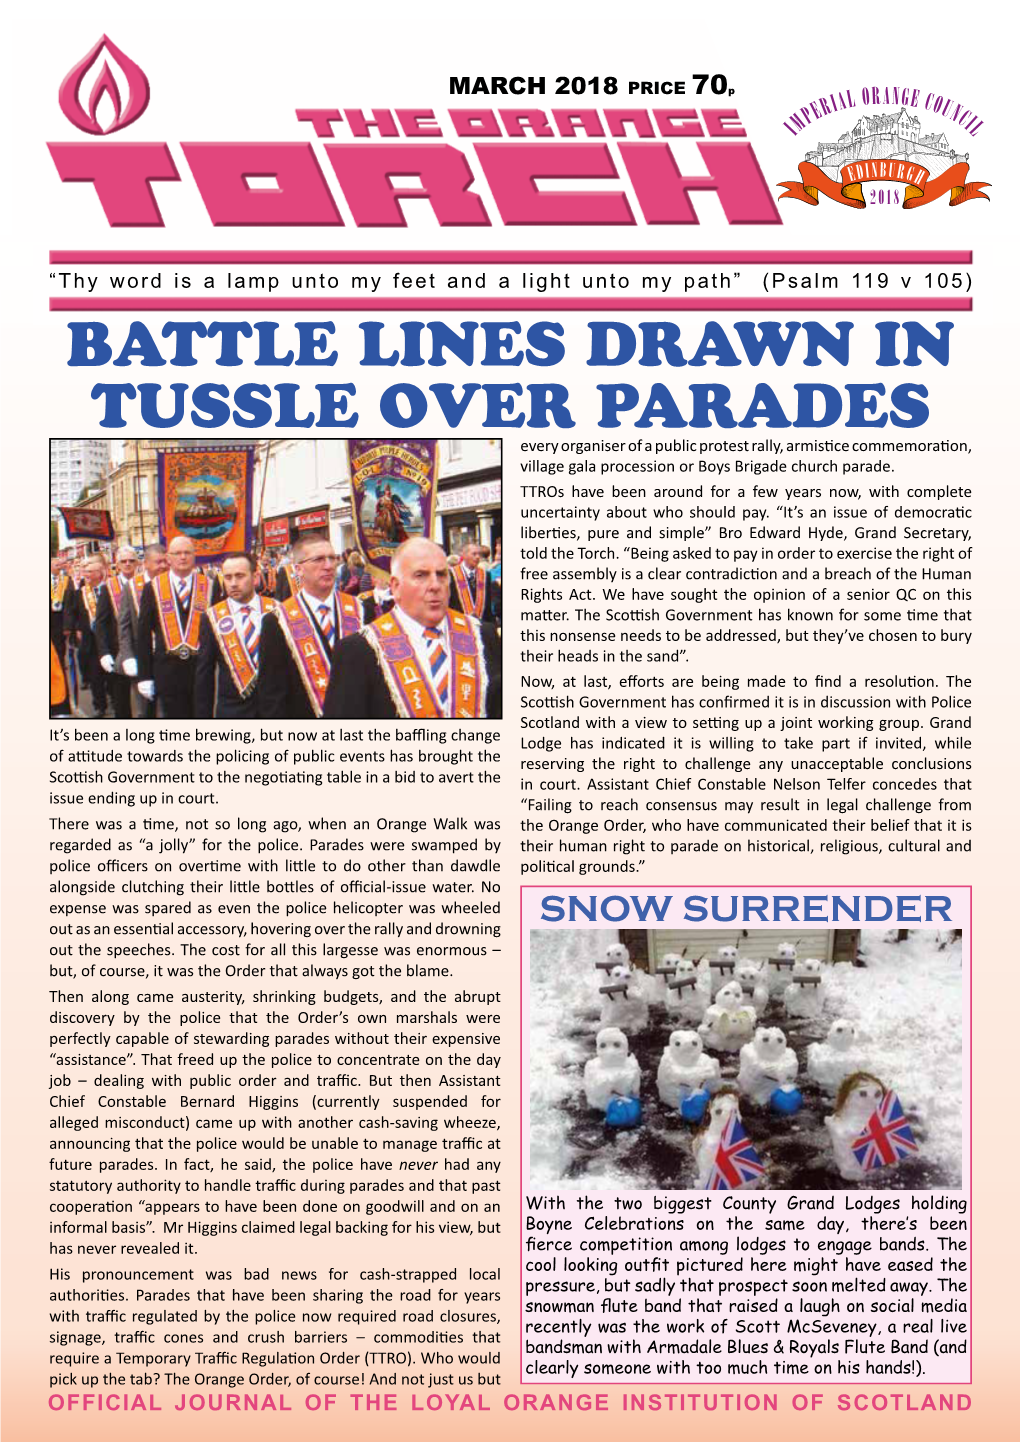 BATTLE LINES DRAWN in TUSSLE OVER PARADES Every Organiser of a Public Protest Rally, Armistice Commemoration, Village Gala Procession Or Boys Brigade Church Parade